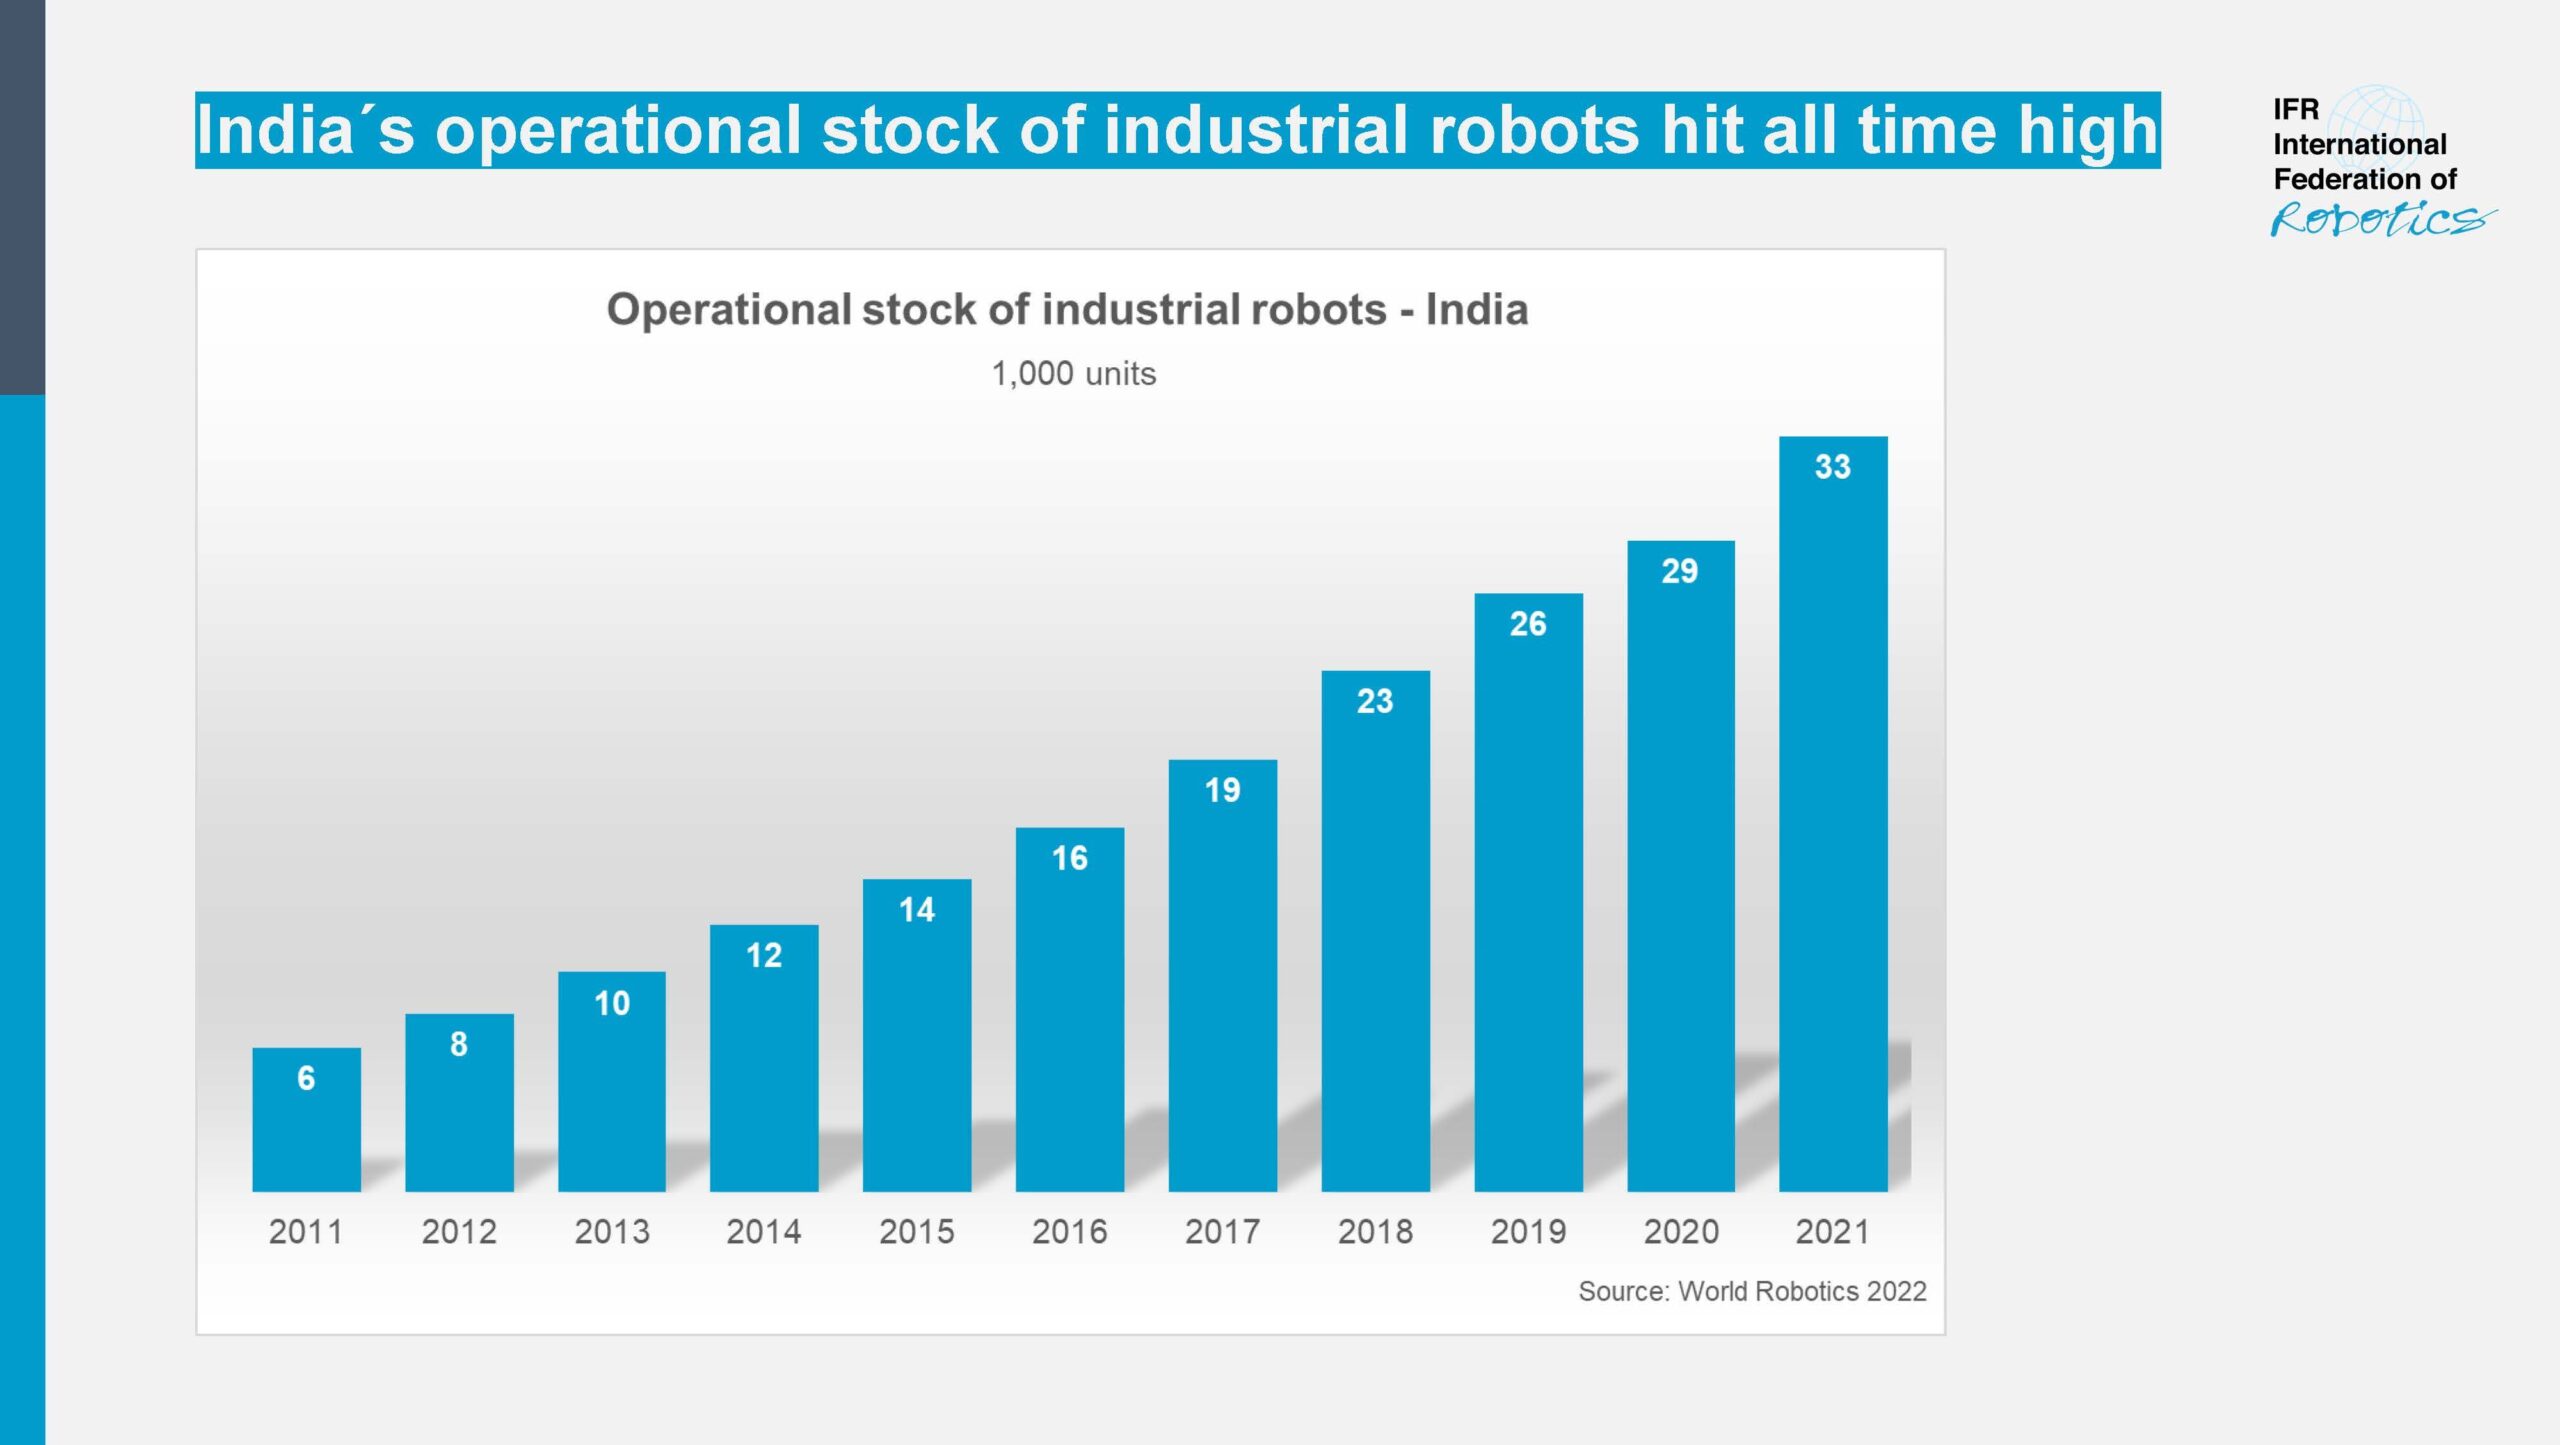 graph showing india's operational stock of industrial robots from 2011-2021.